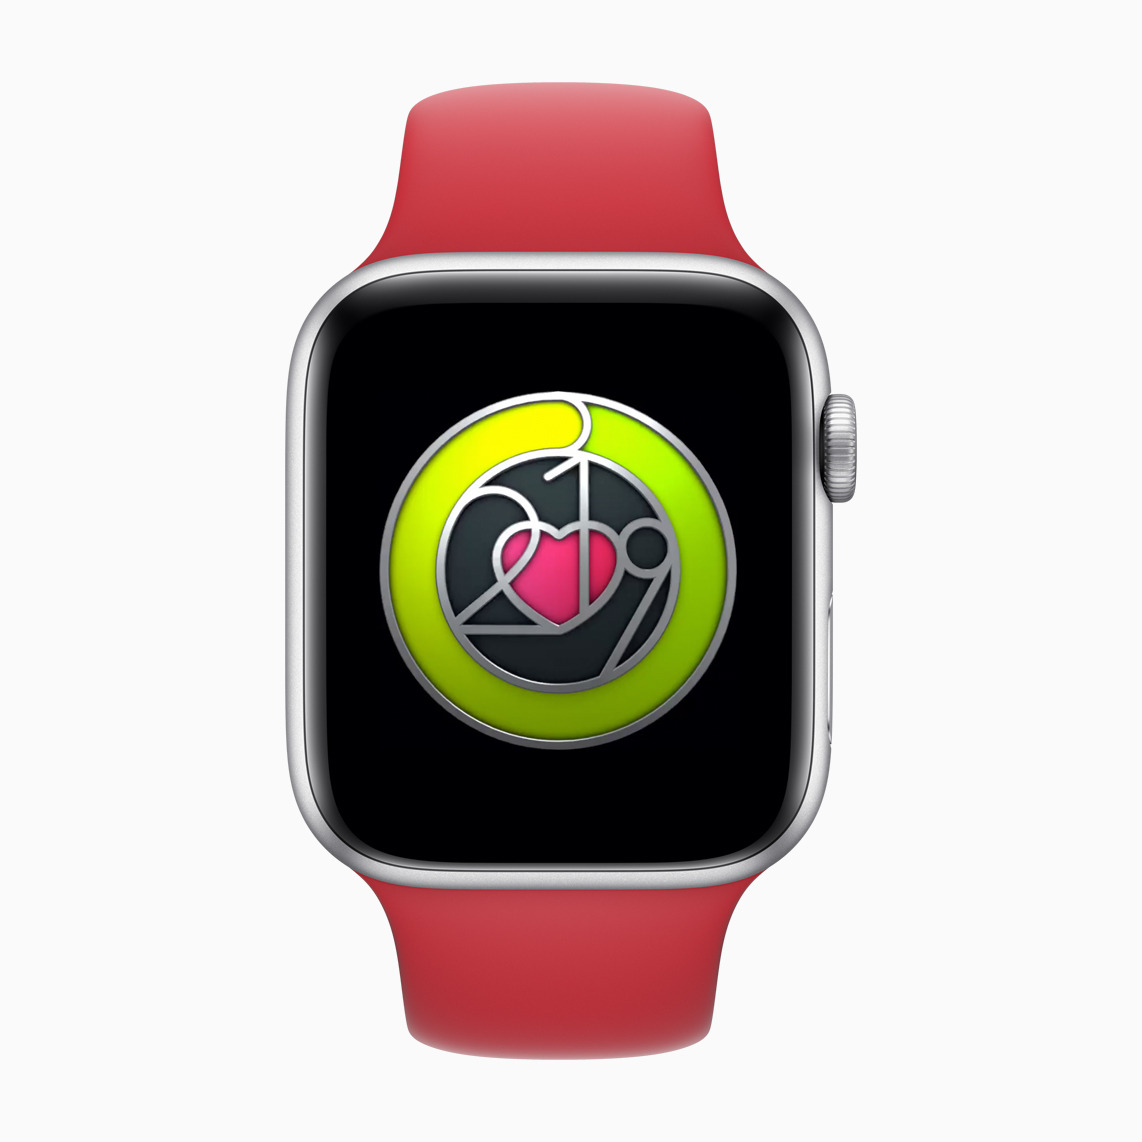 Apple commemorating Heart Month with Apple Watch activity challenge